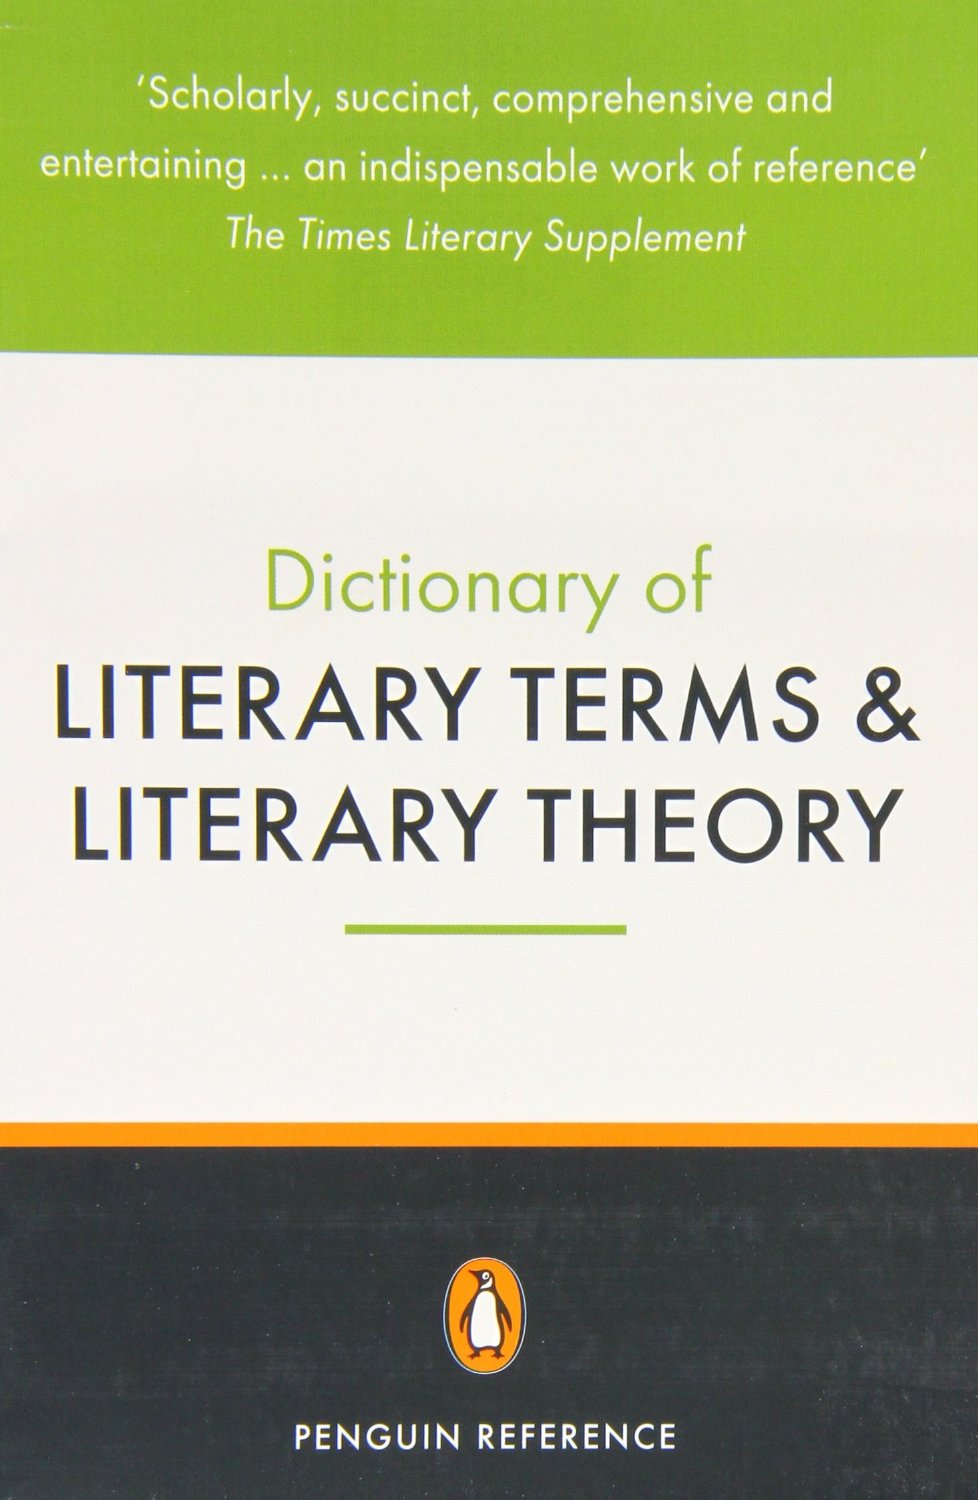 THE PENGUIN DICT. OF LIT. TERMS & LIT. THEORY